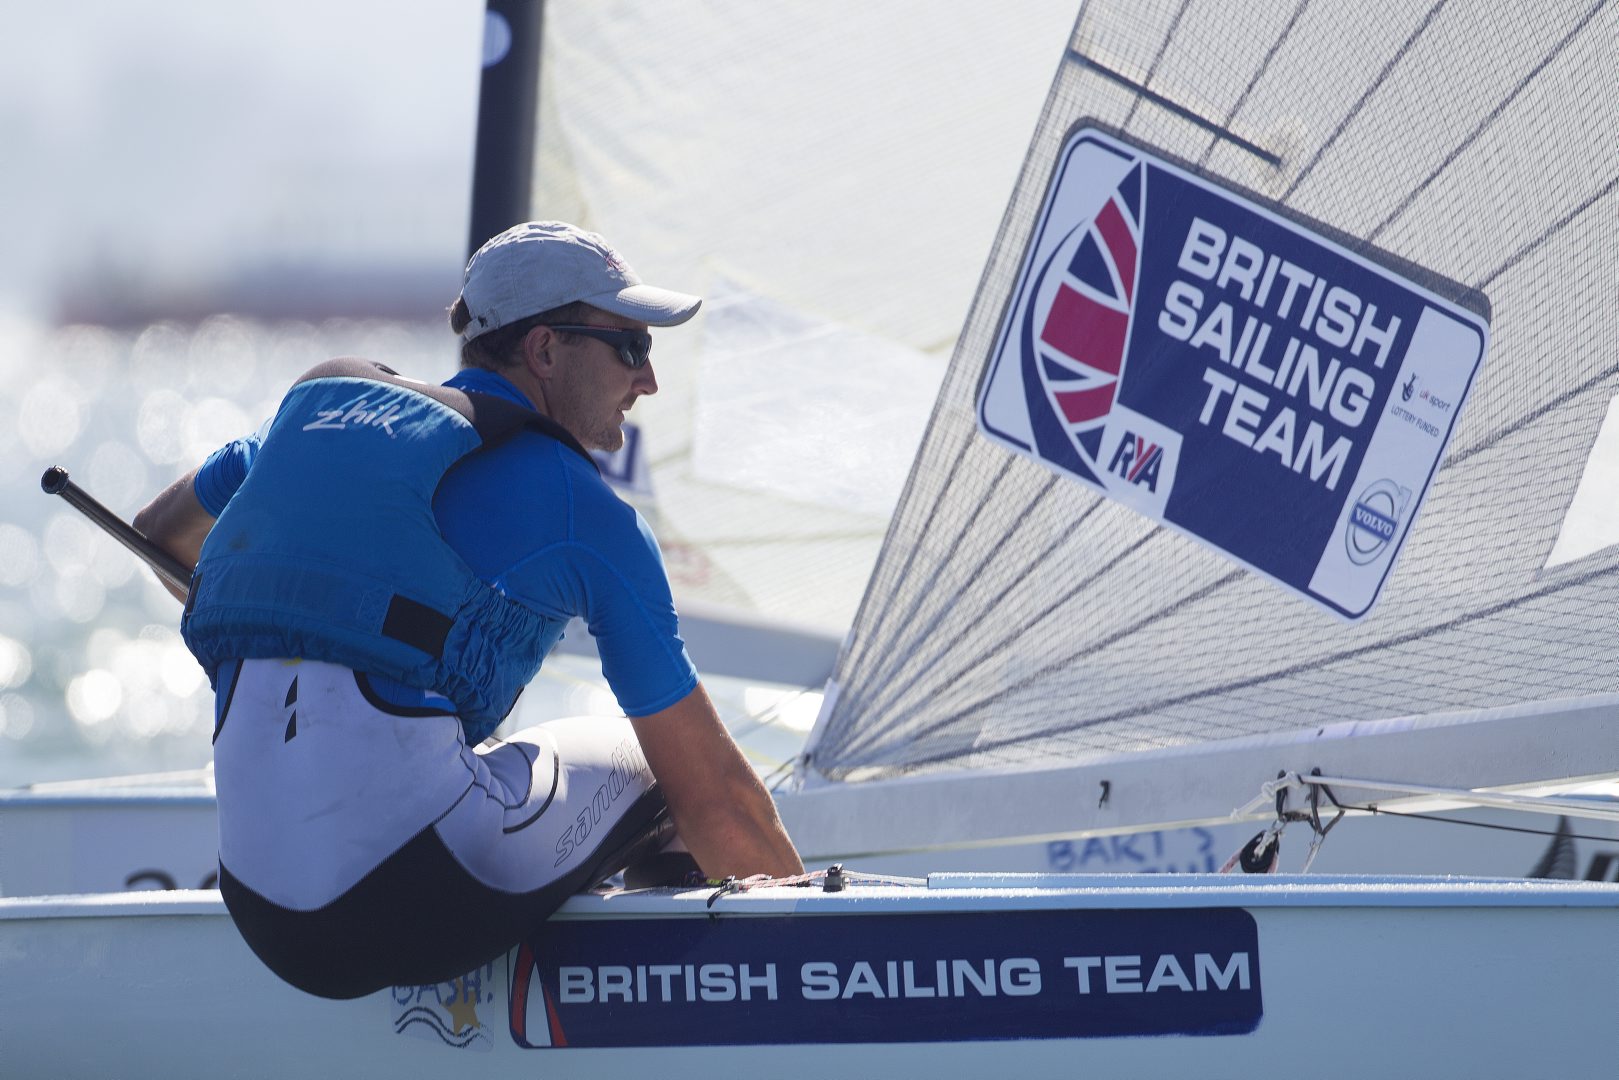 Giles Scott has been awarded British Sailing's Athlete of the Year ©Ocean Images/British Sailing Team